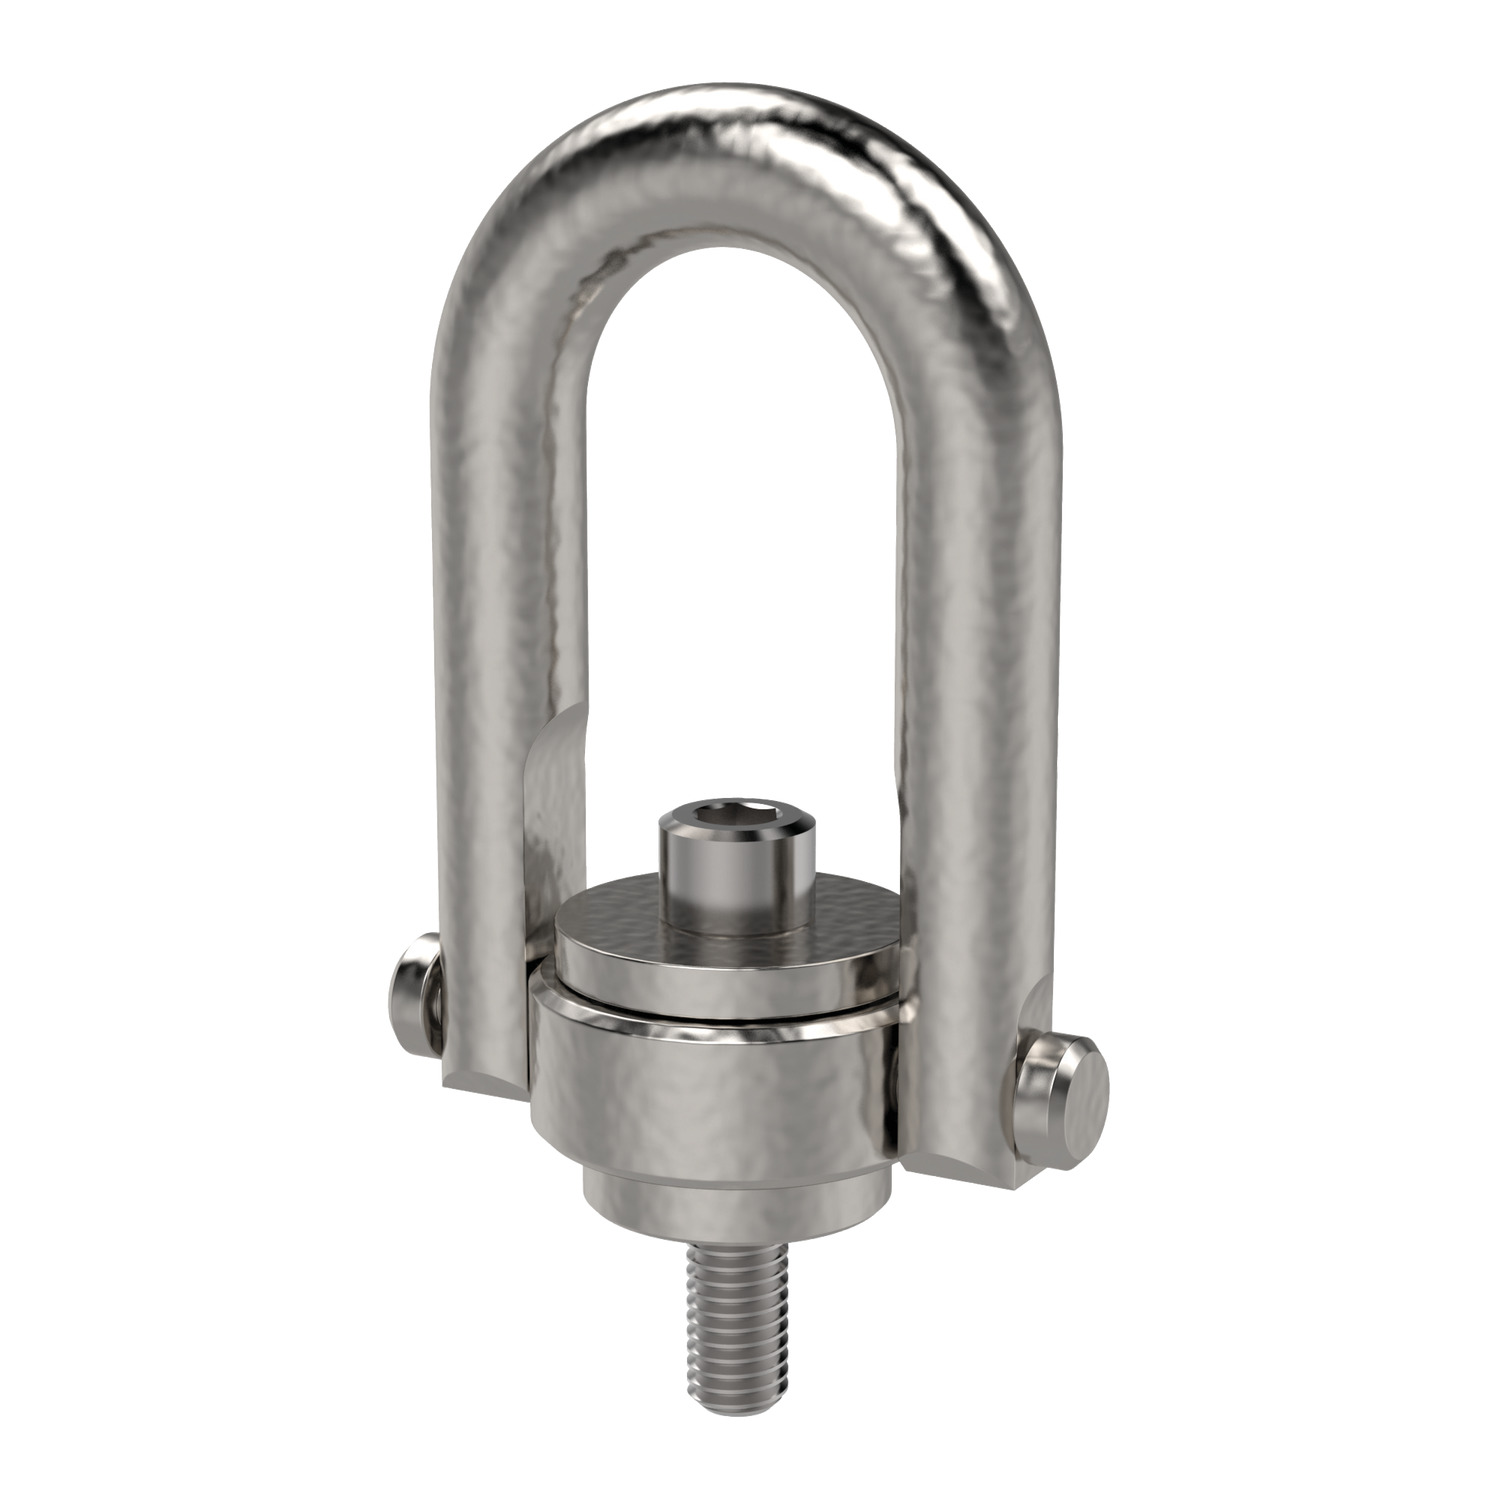 Product 63581, Lifting Points - Double Swivel - Male standard bar - UNC thread - stainless steel / 